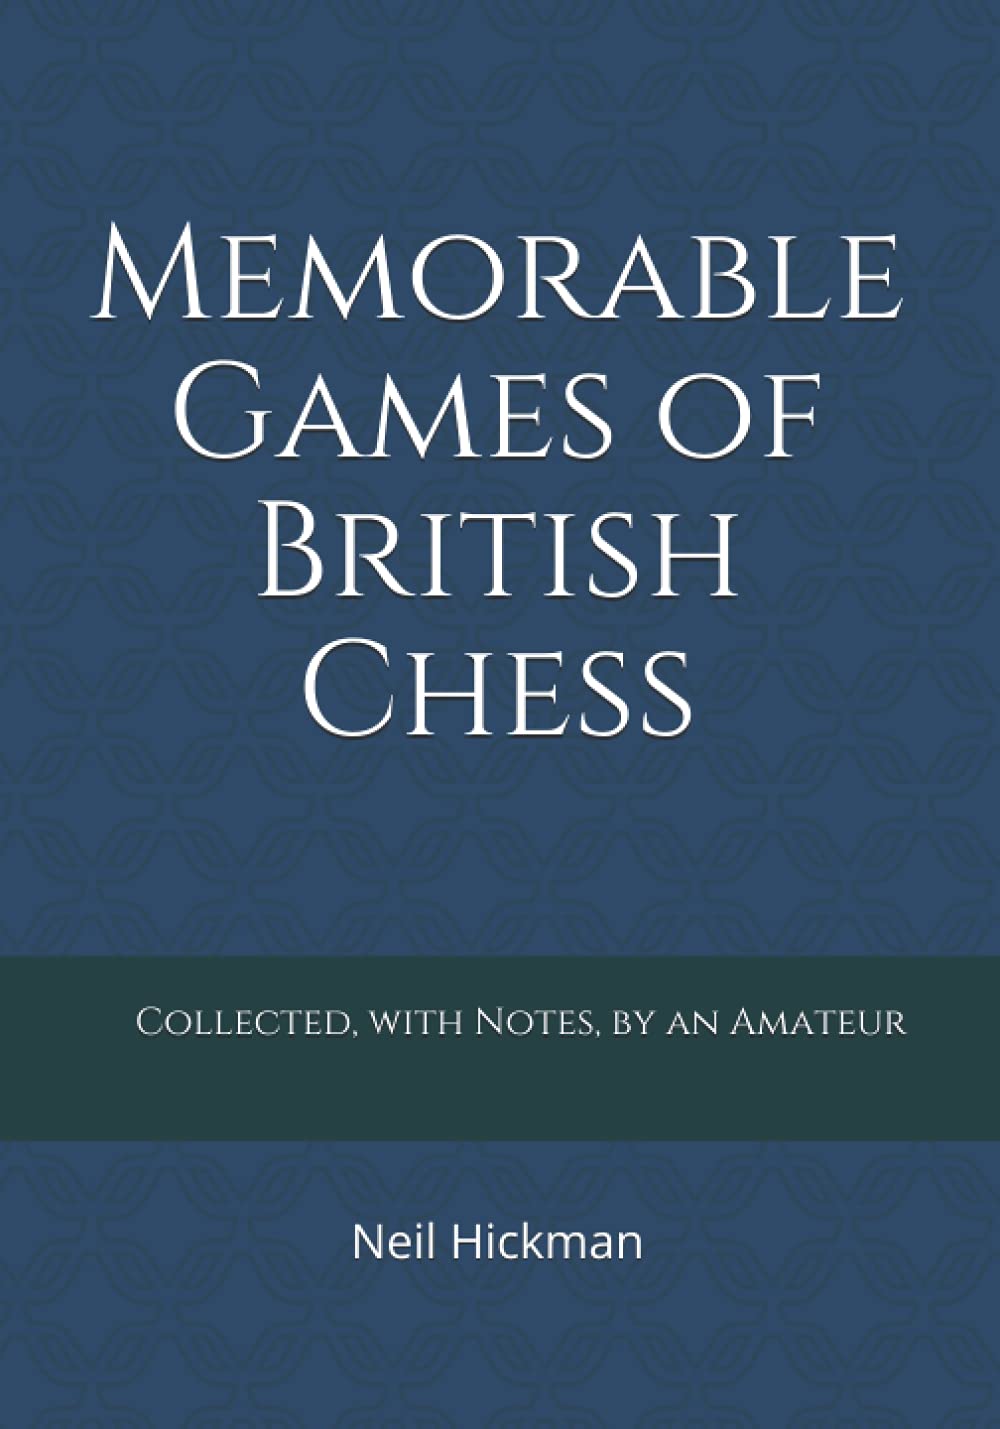 Memorable Games of British Chess, Neil Hickman, Amazon Publishing, 3rd September 2019, ISBN-13 ‏ : ‎ 978-1794053564